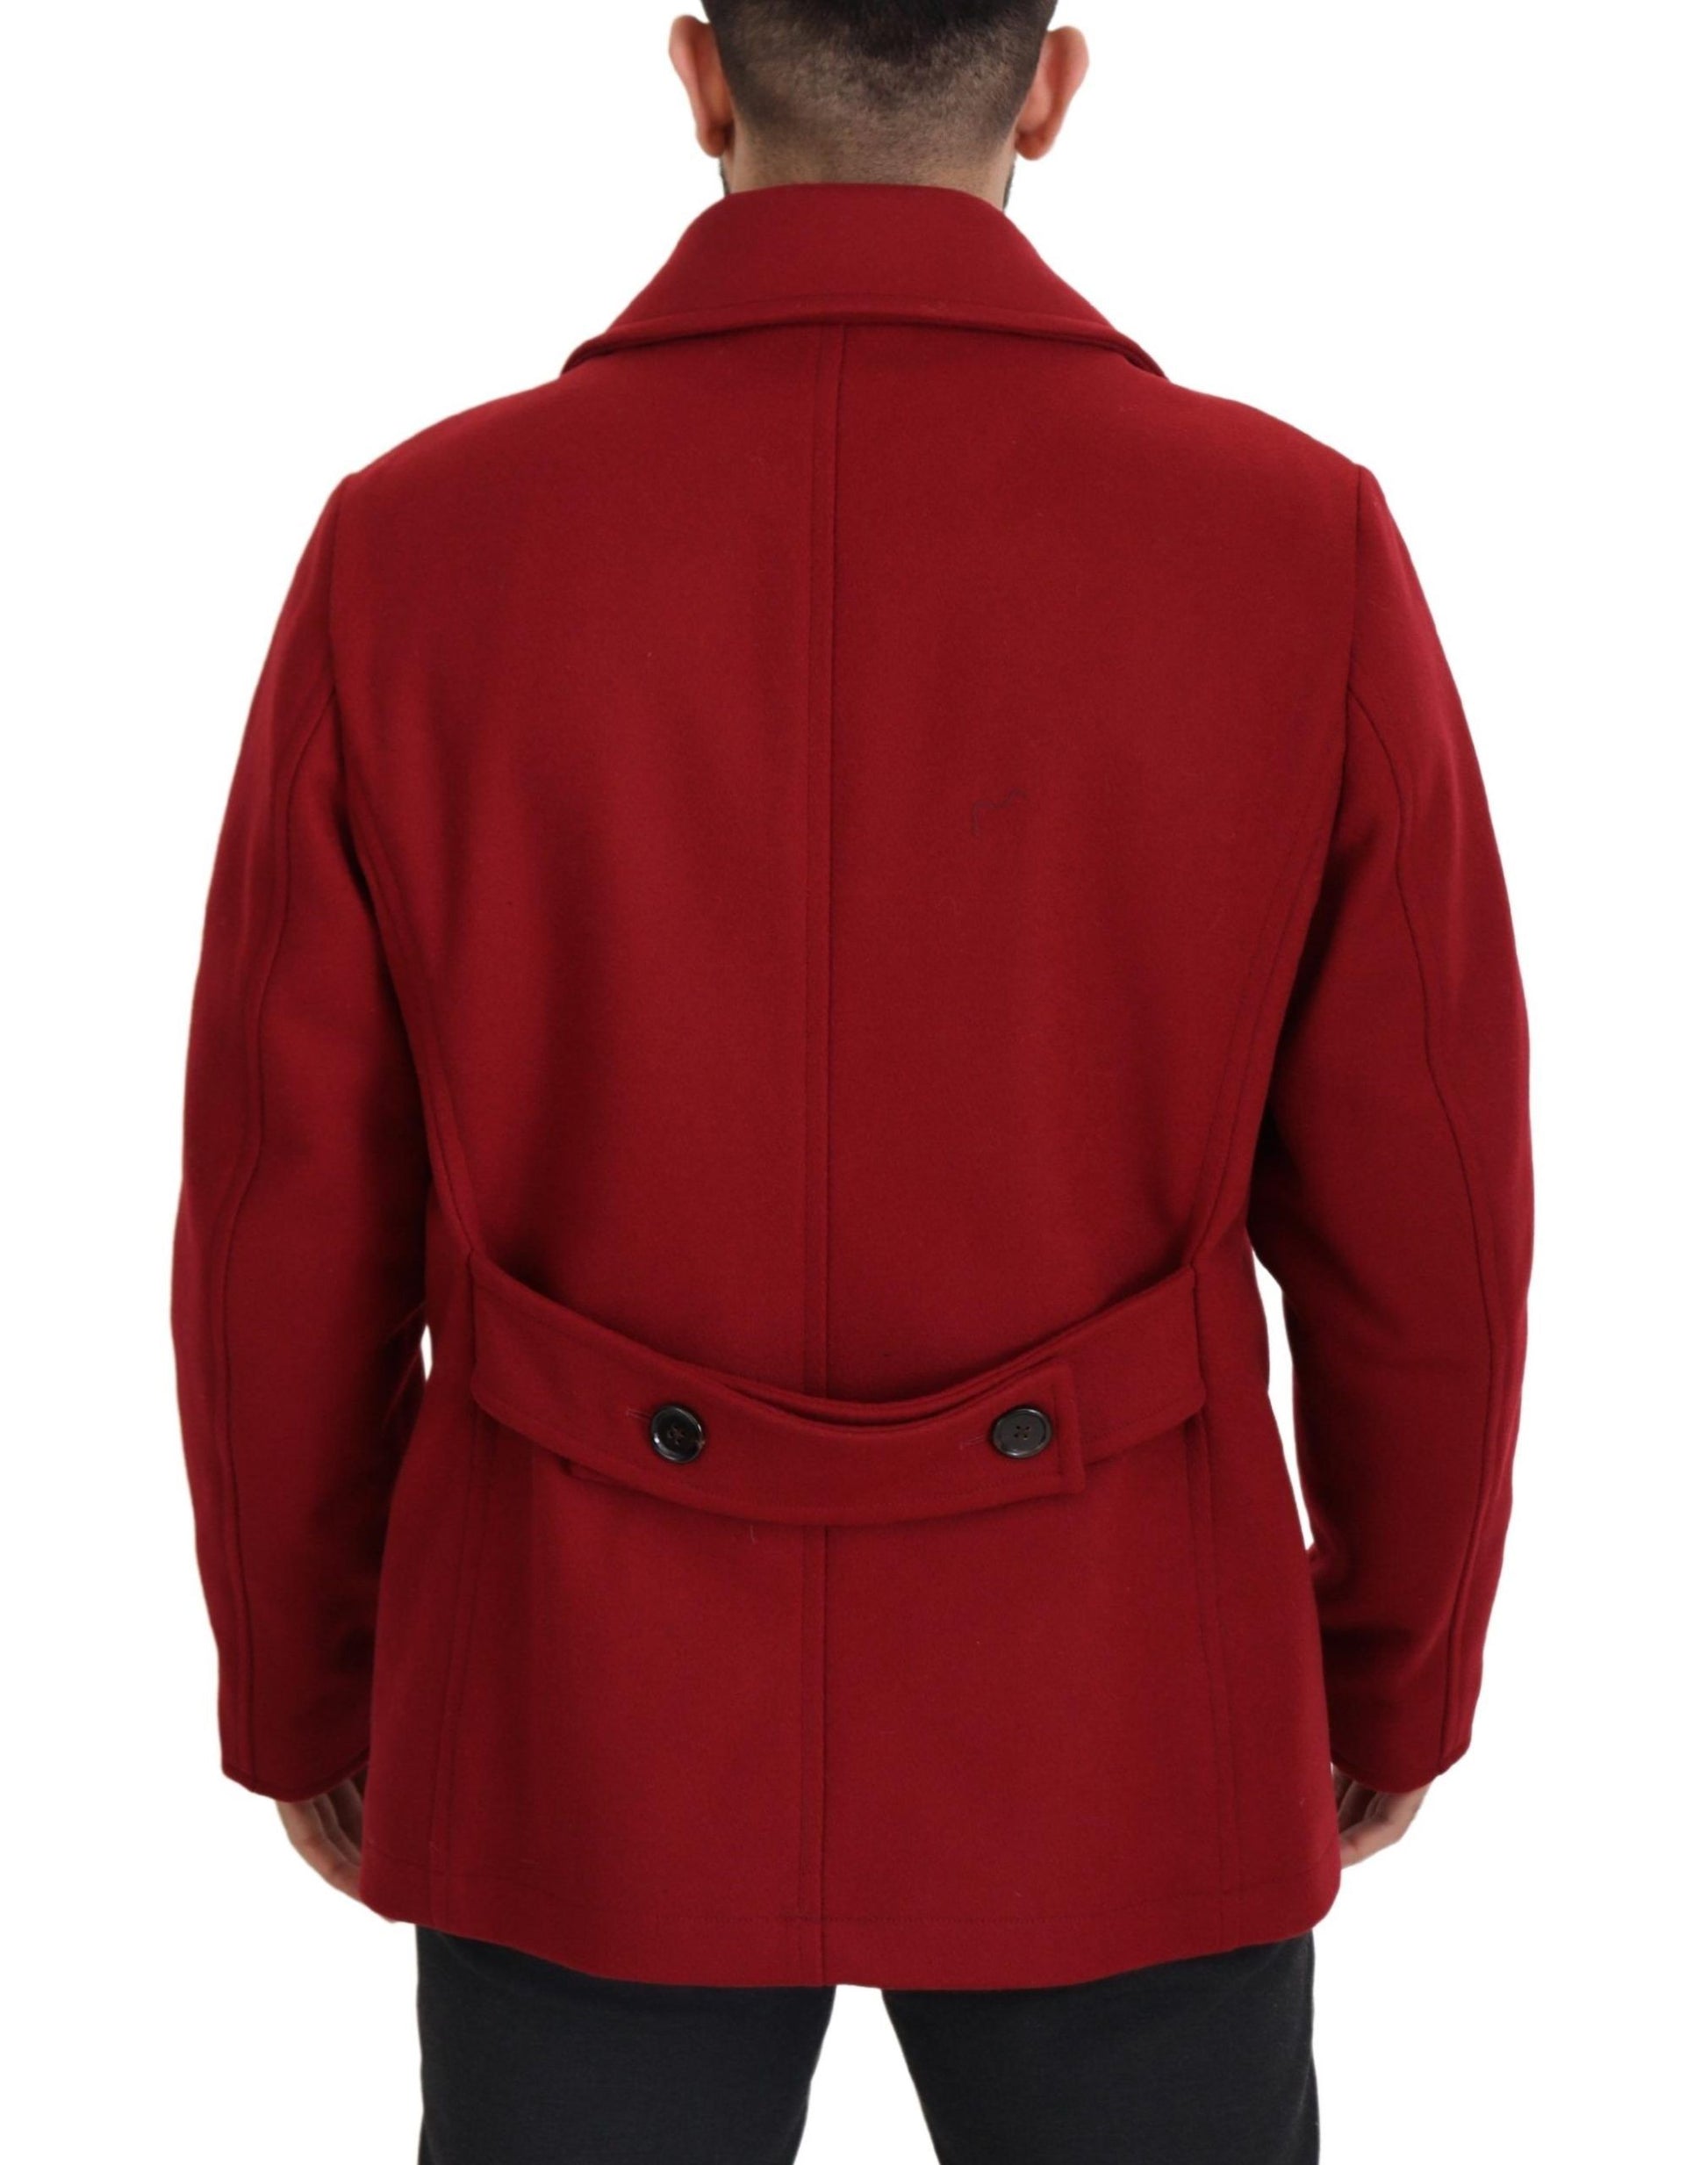 Elegant Red Double Breasted Wool Jacket